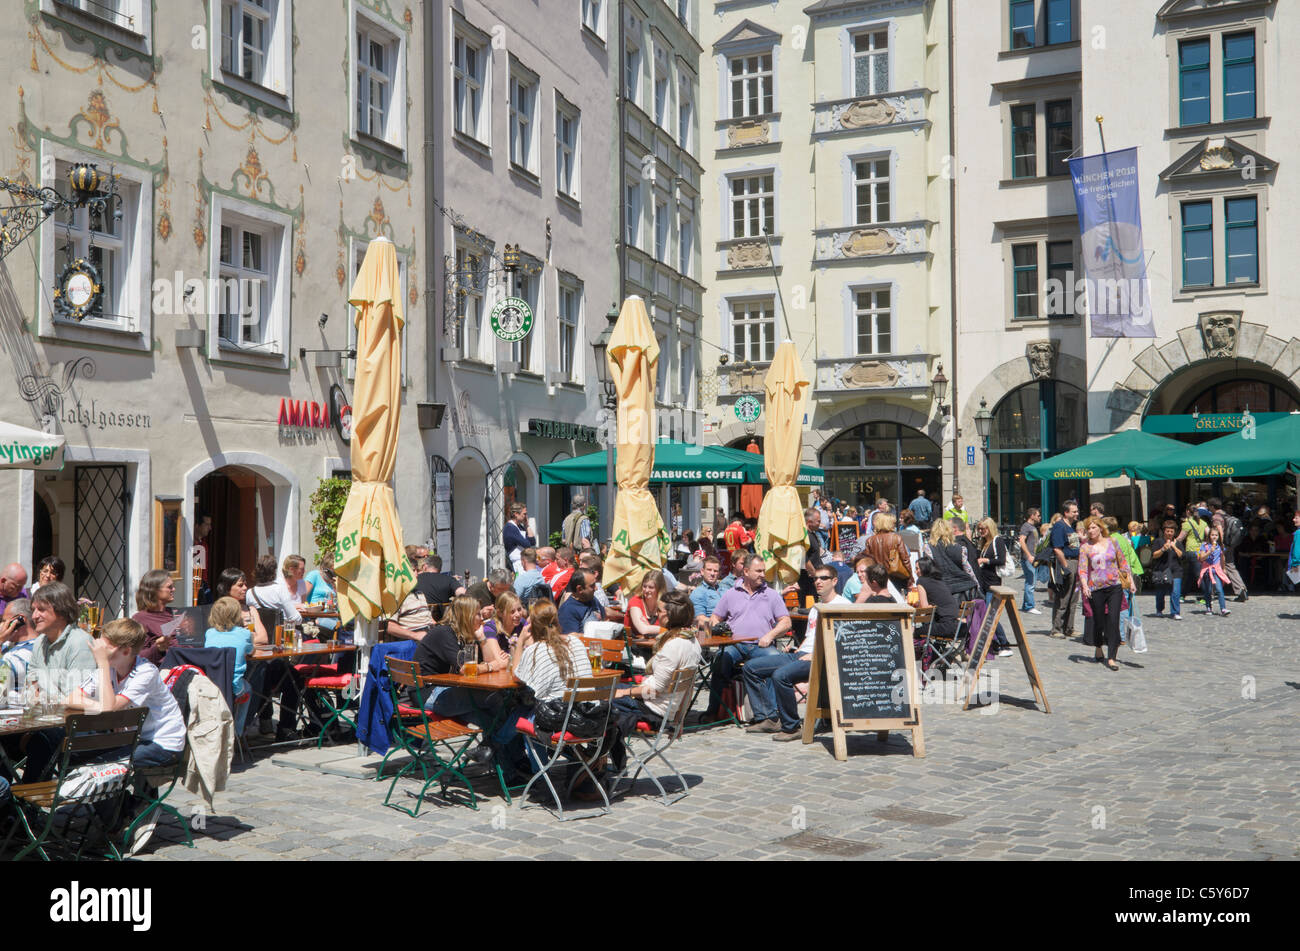 People eating and drinking at restaurants on Platzl, Munich, Germany Stock Photo